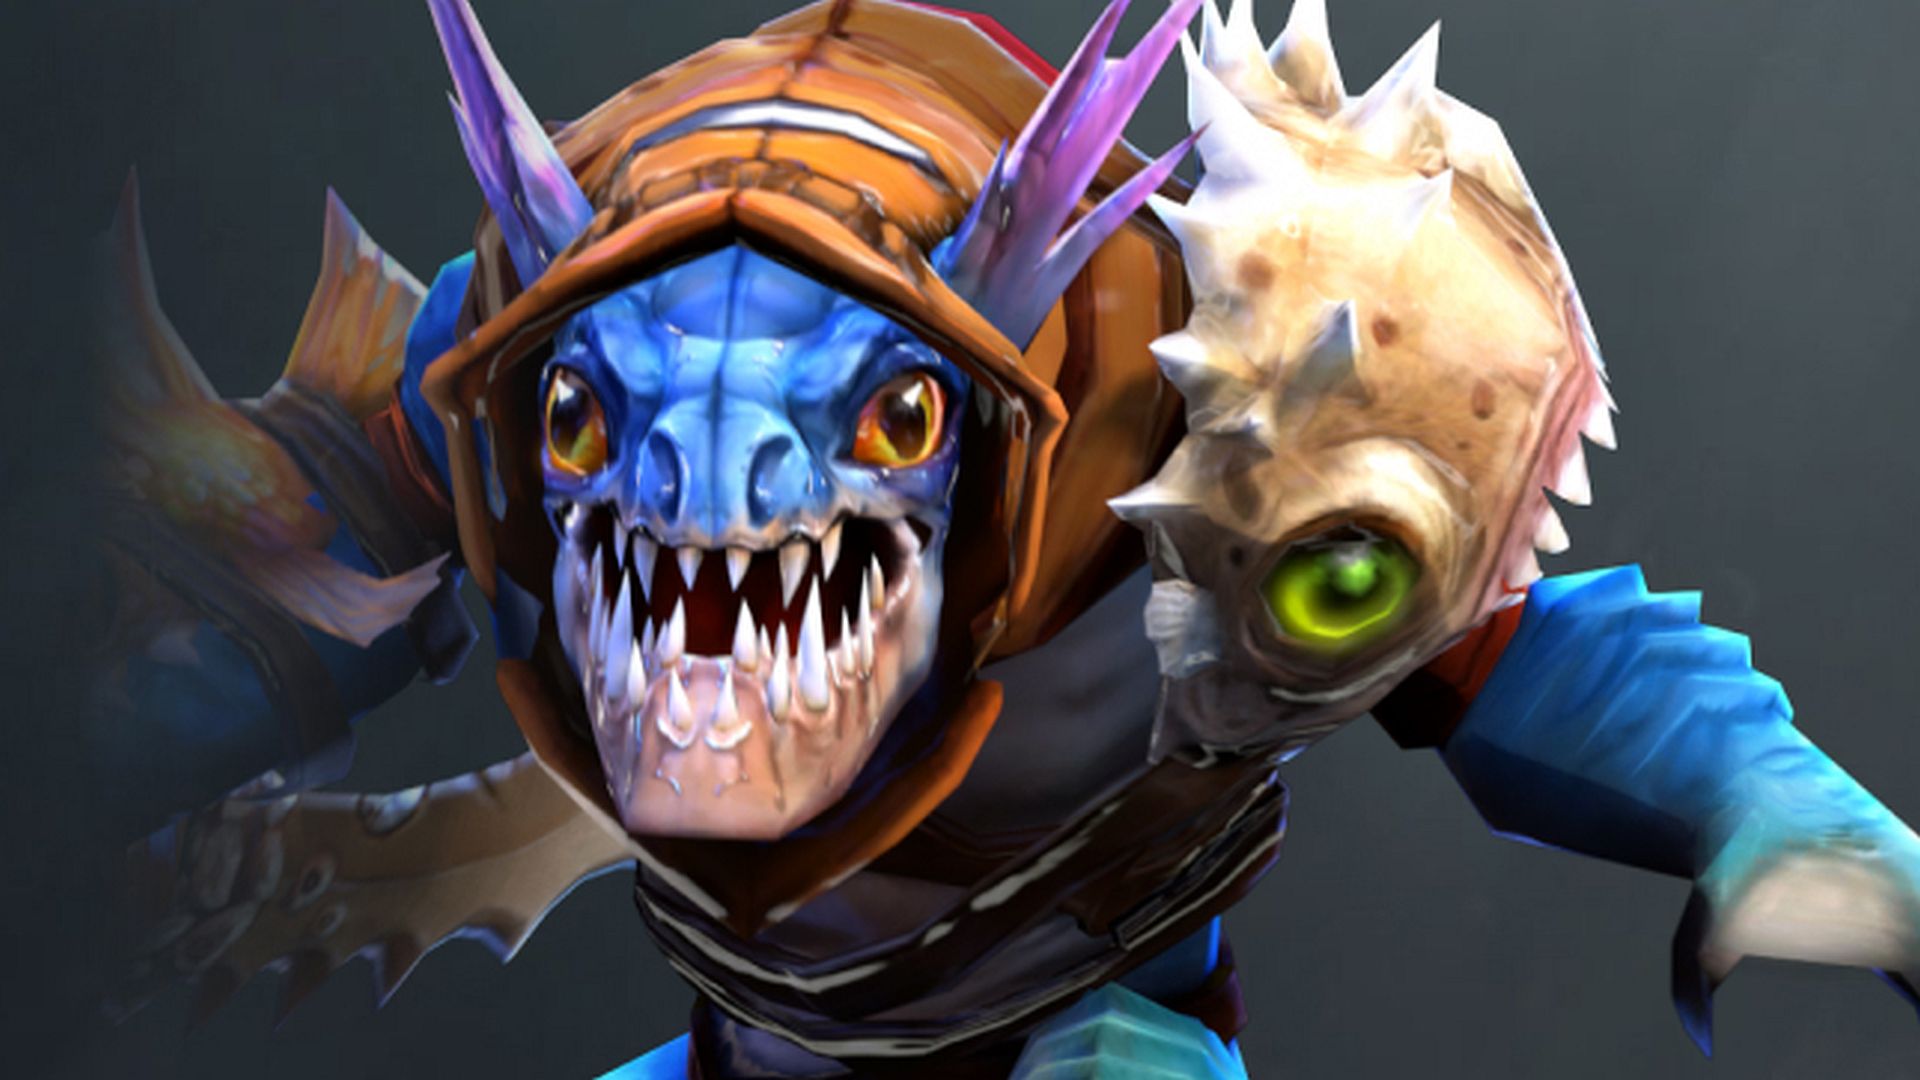 Broodmother, Slark, Lycan get changes with Dota 2 patch 7.30b